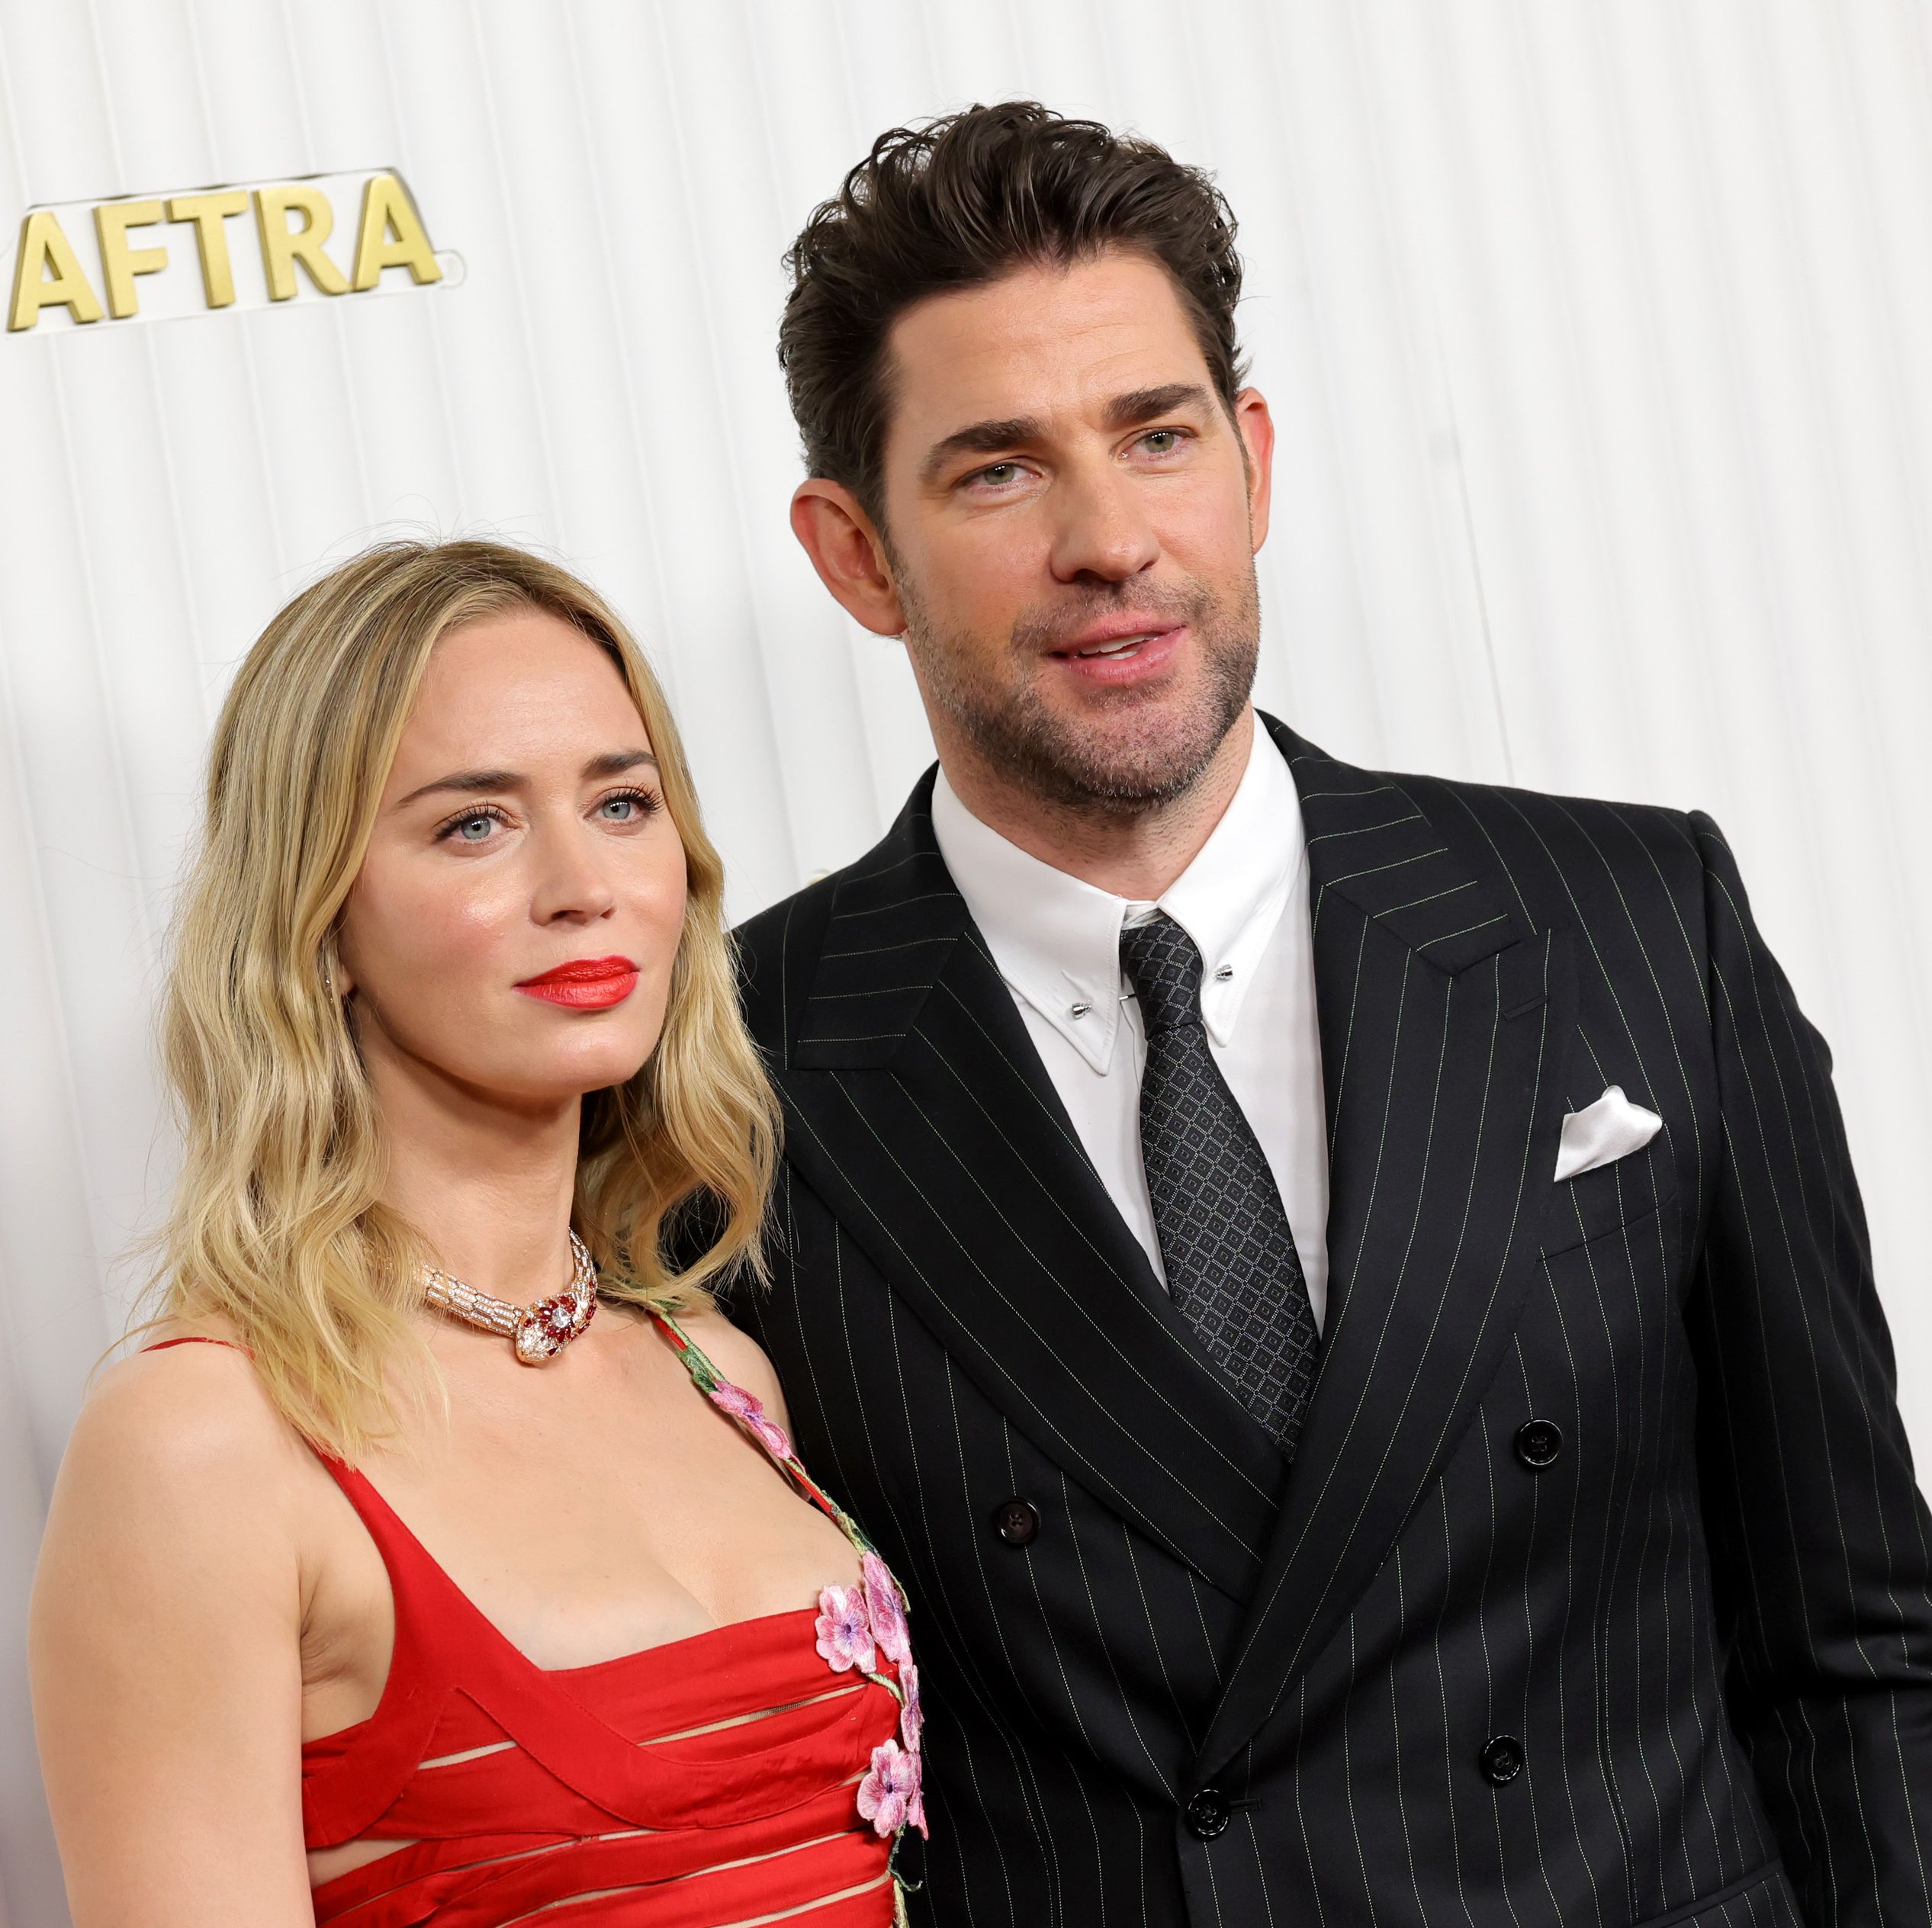 Emily Blunt Is Red Hot in a Bandage Dress While on a Rare Public Date With John Krasinski